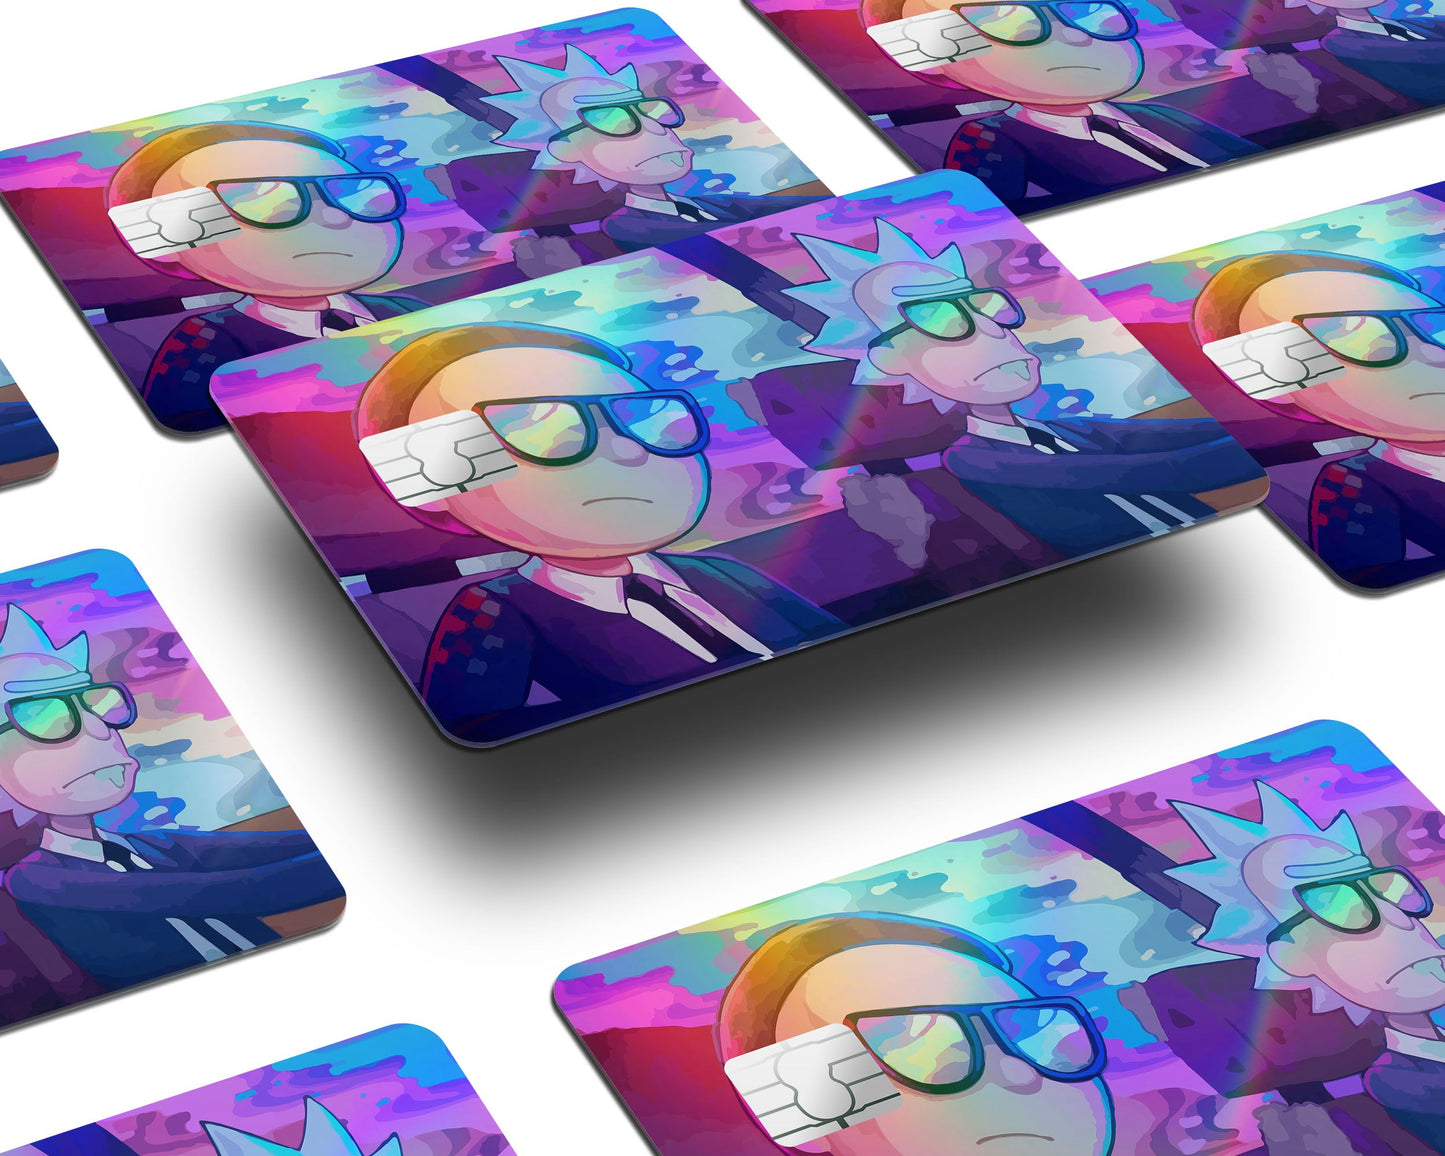 Anime Town Creations Holographic Credit Card Agents Rick and Morty Window Skins - Anime Rick and Morty Holographic Credit Card Skin